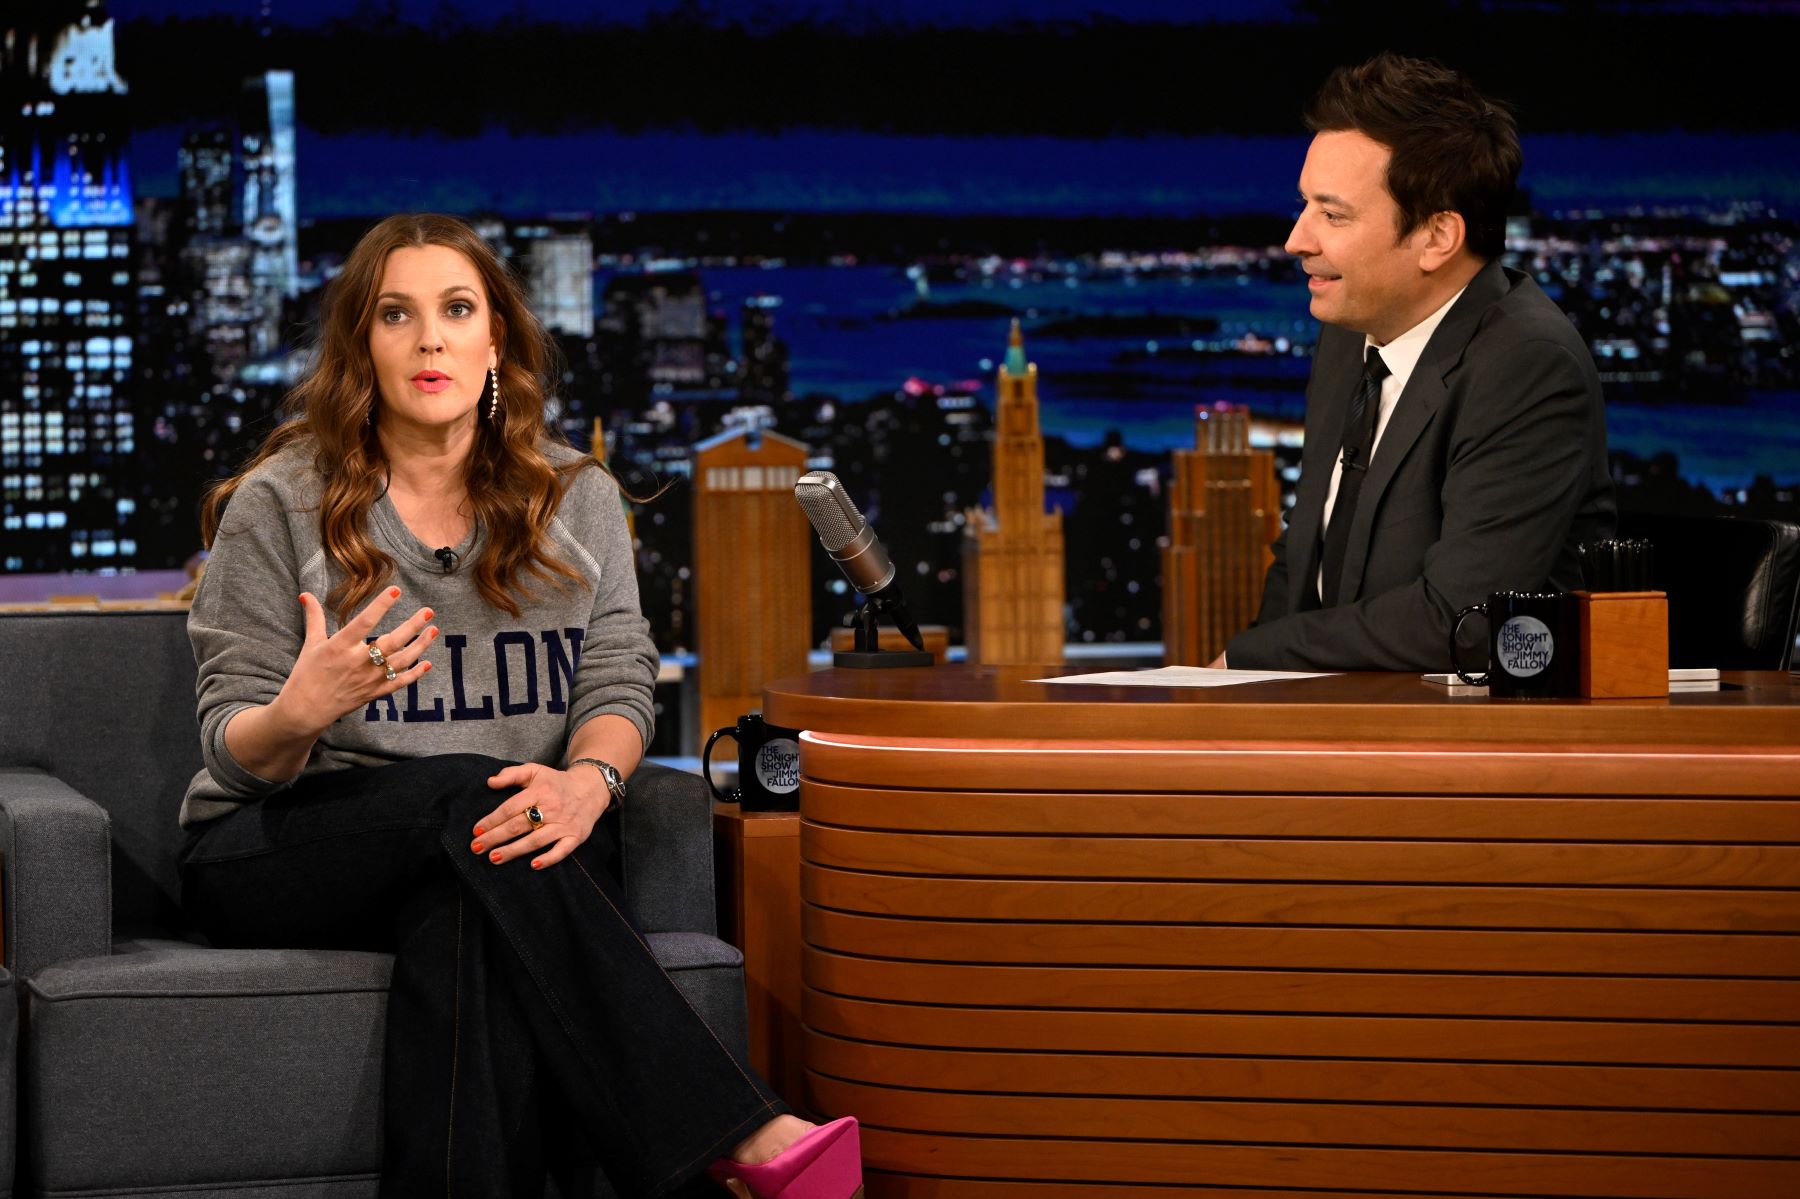 Drew Barrymore on 'The Tonight Show with Jimmy Fallon'